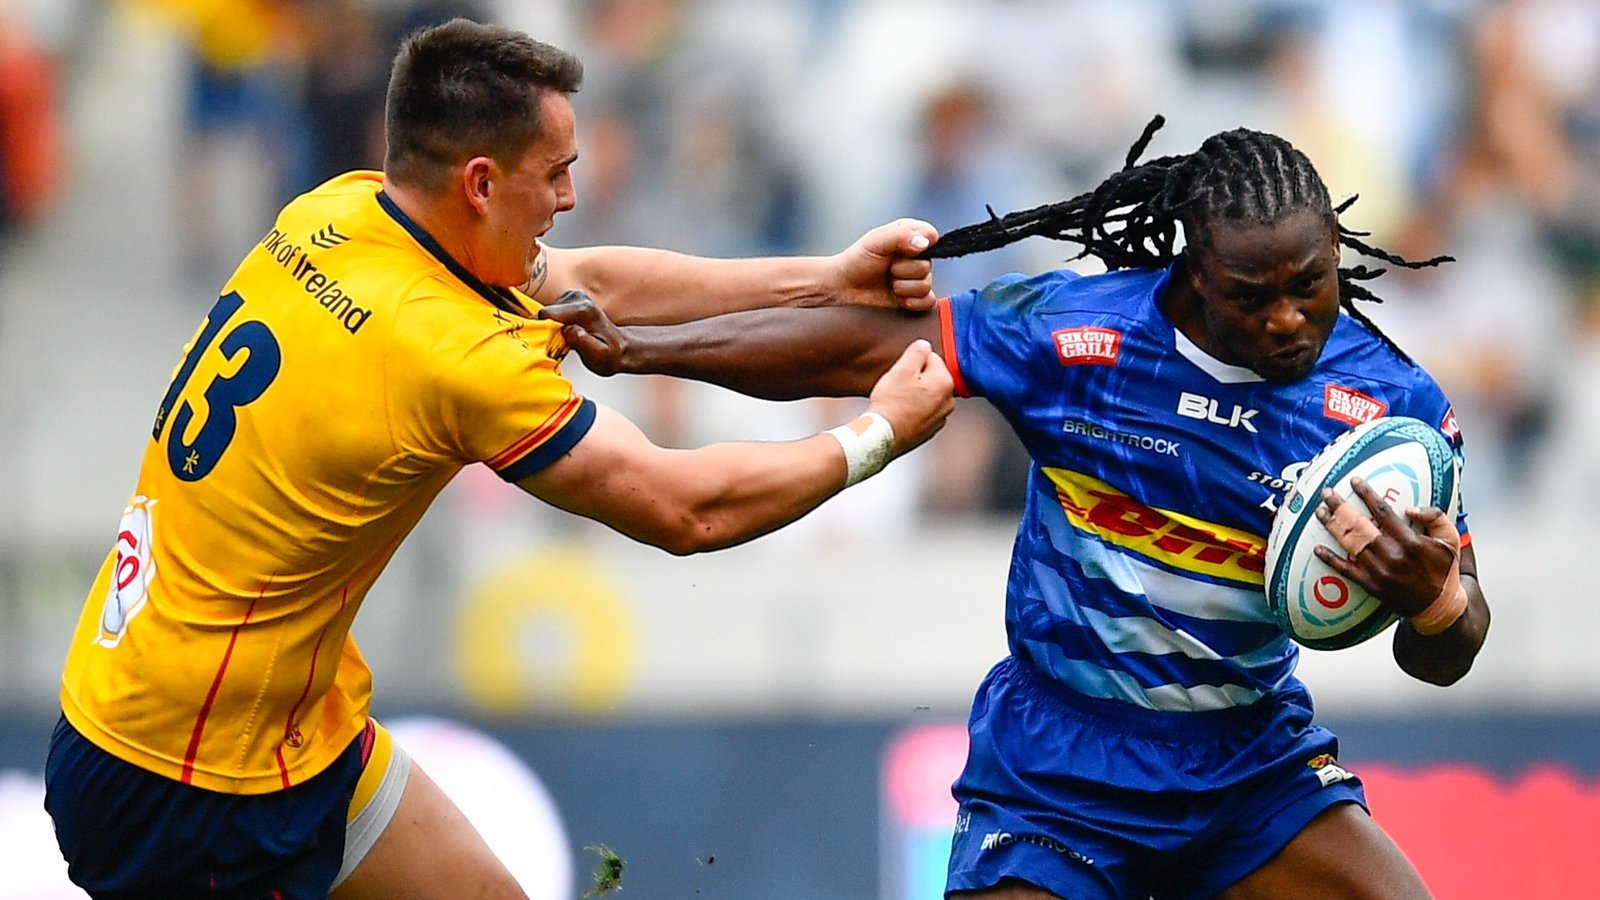 United Rugby Championship Rd 13 All you need to know